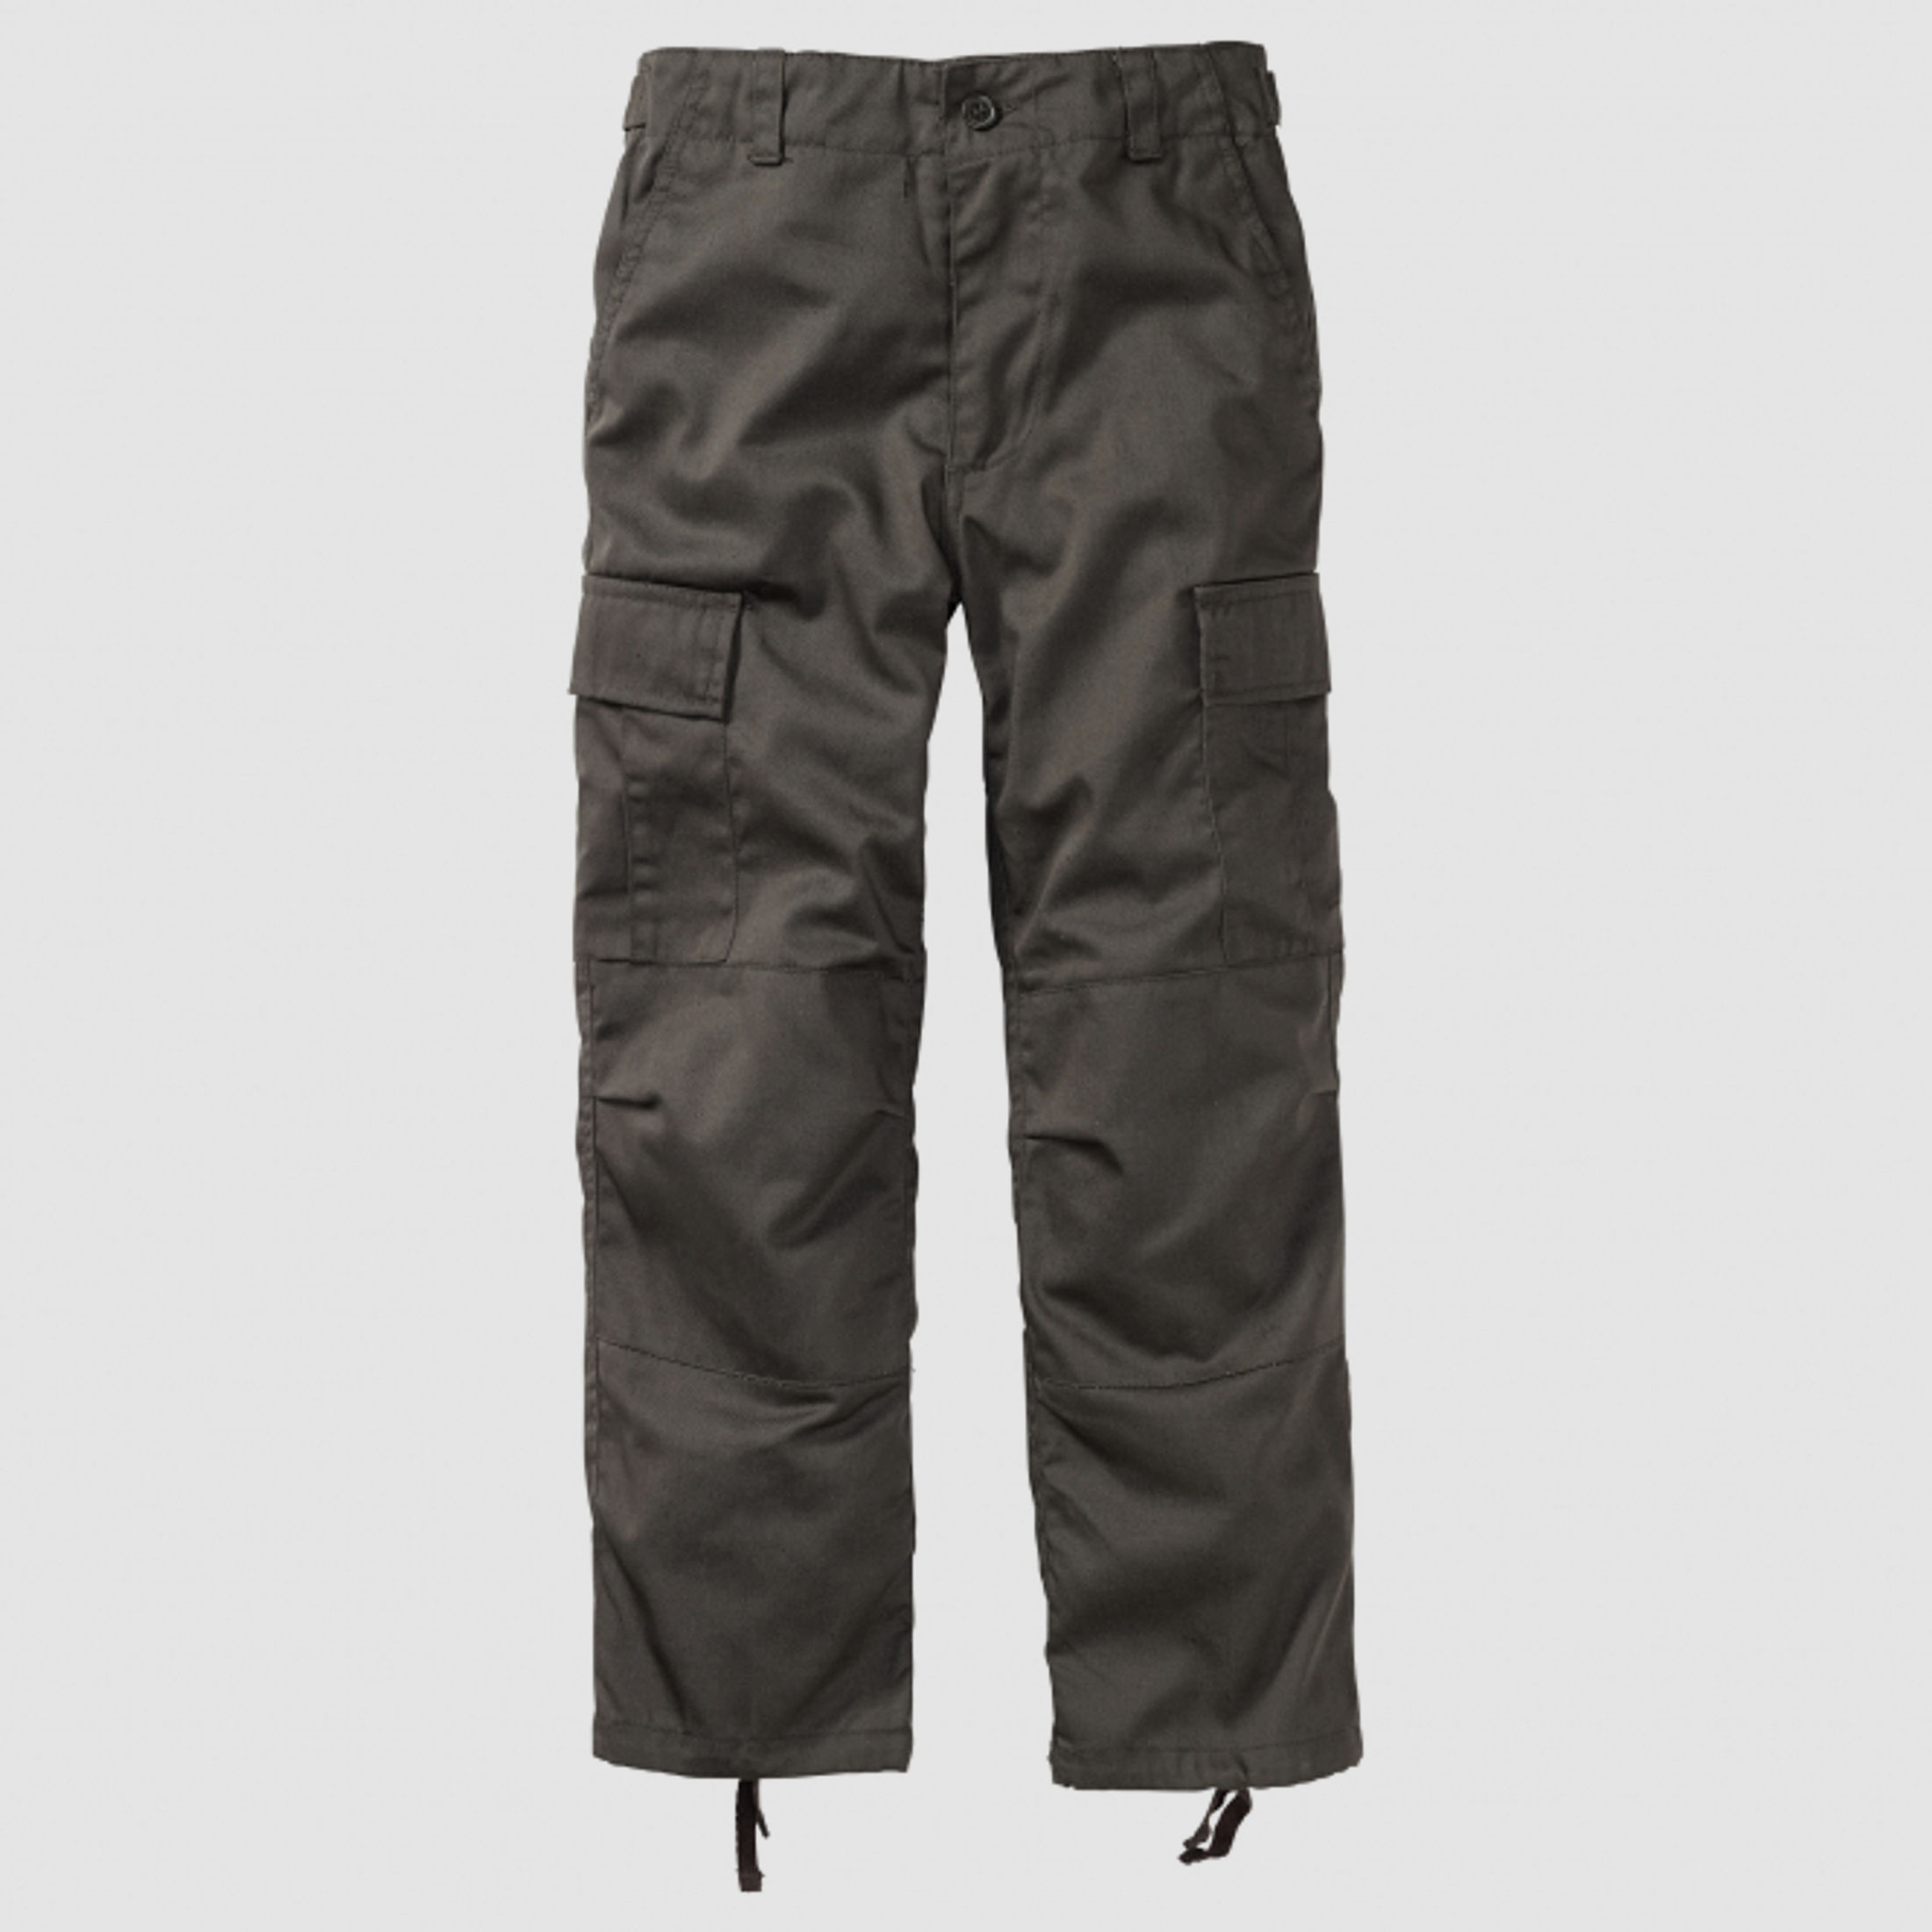 Percussion       Percussion   Kinder Outdoorhose BDU